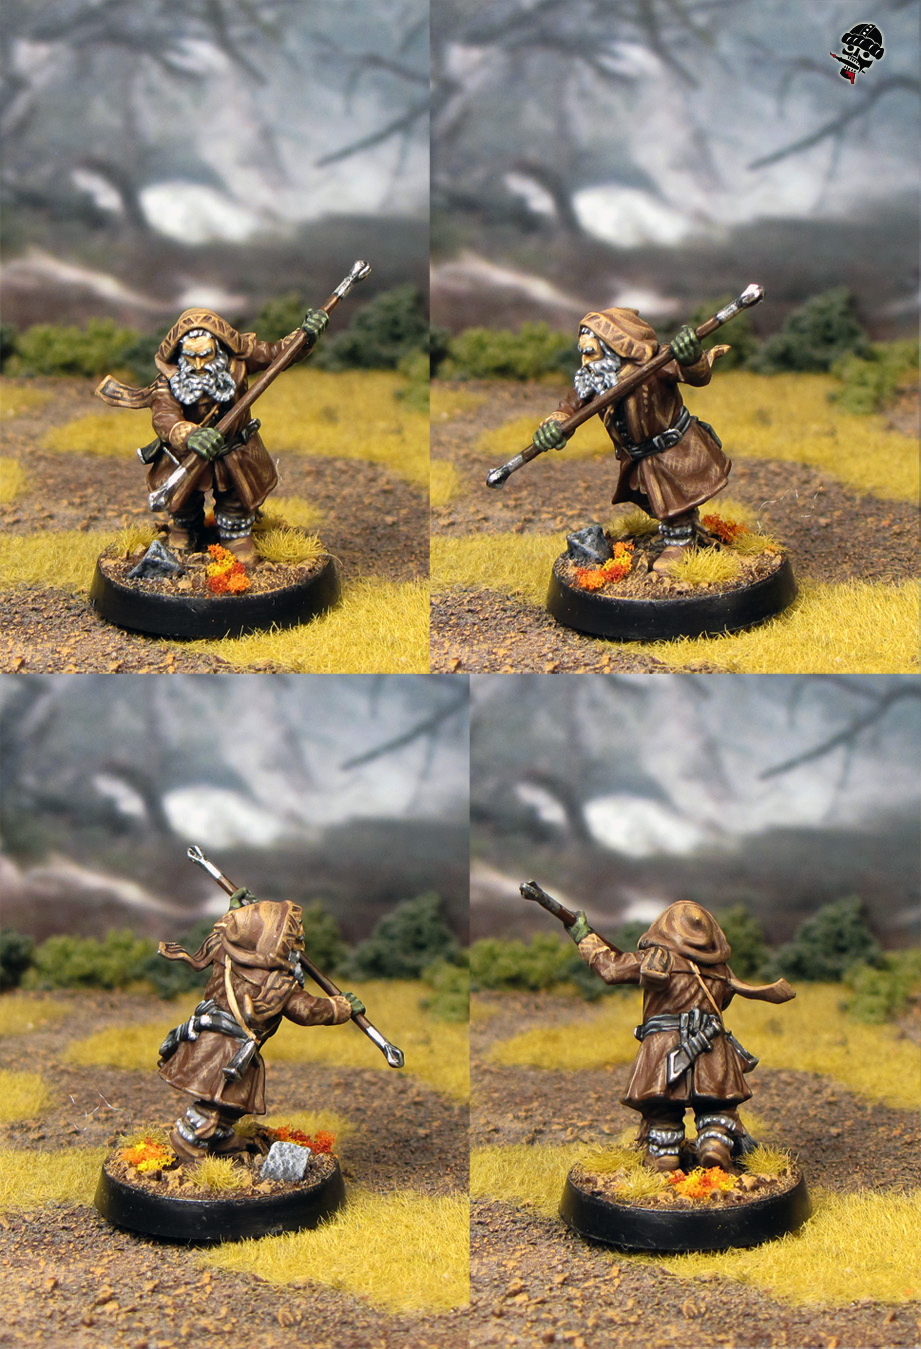 Oin from the Escape from Goblin town box set from Games Workshop painted by Neldoreth - An Hour of Wolves & Shattered Shields